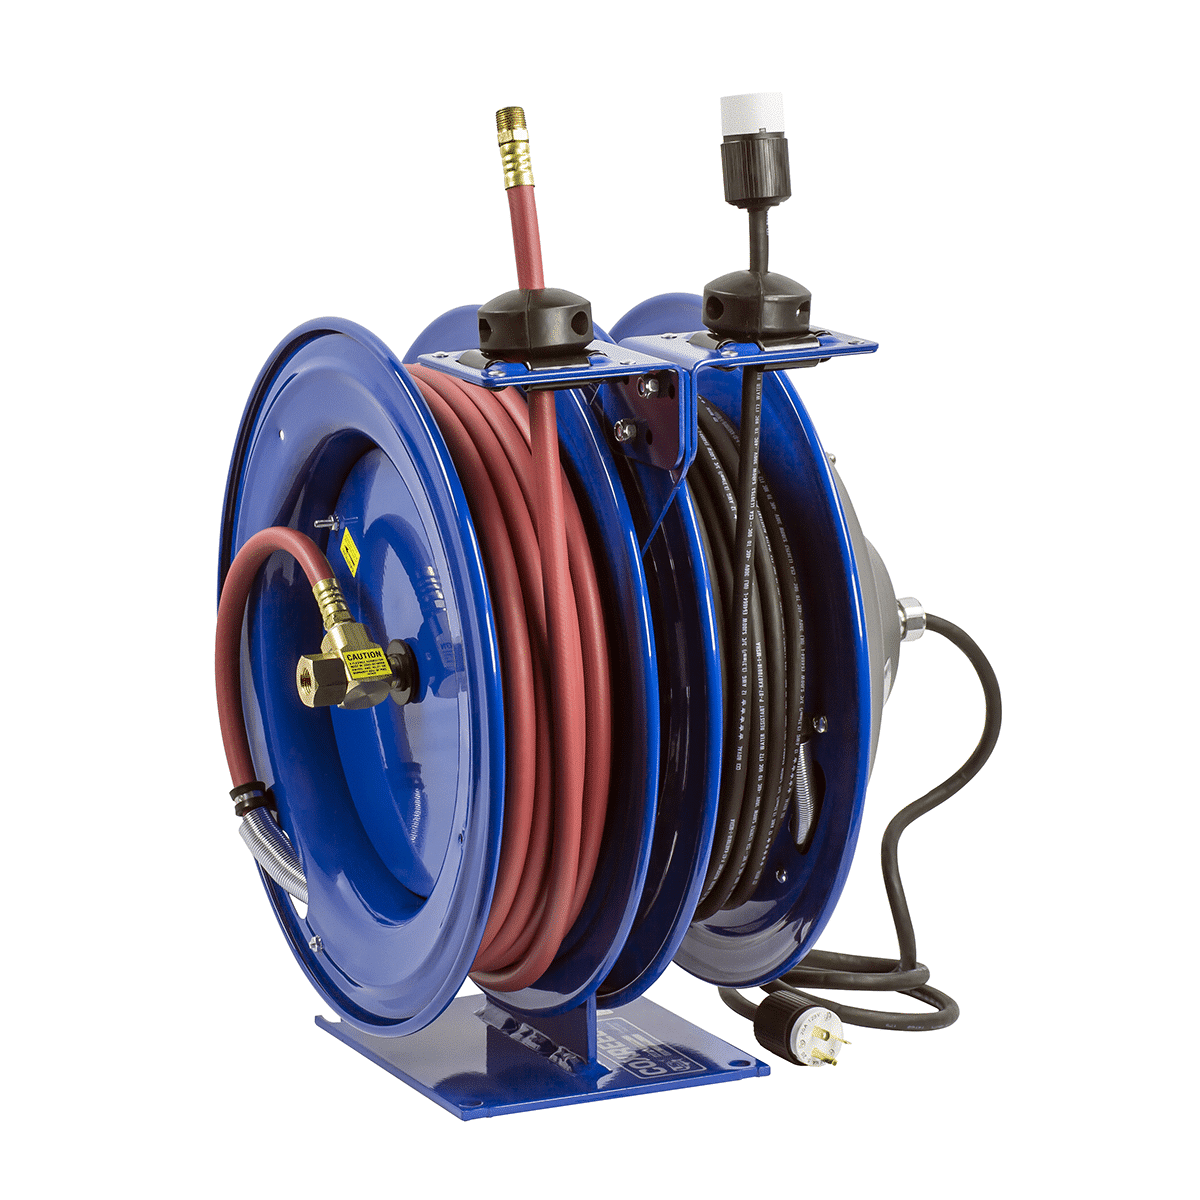 EZ-Coil® Safety Series Electric Cord ReelsMotion Savers